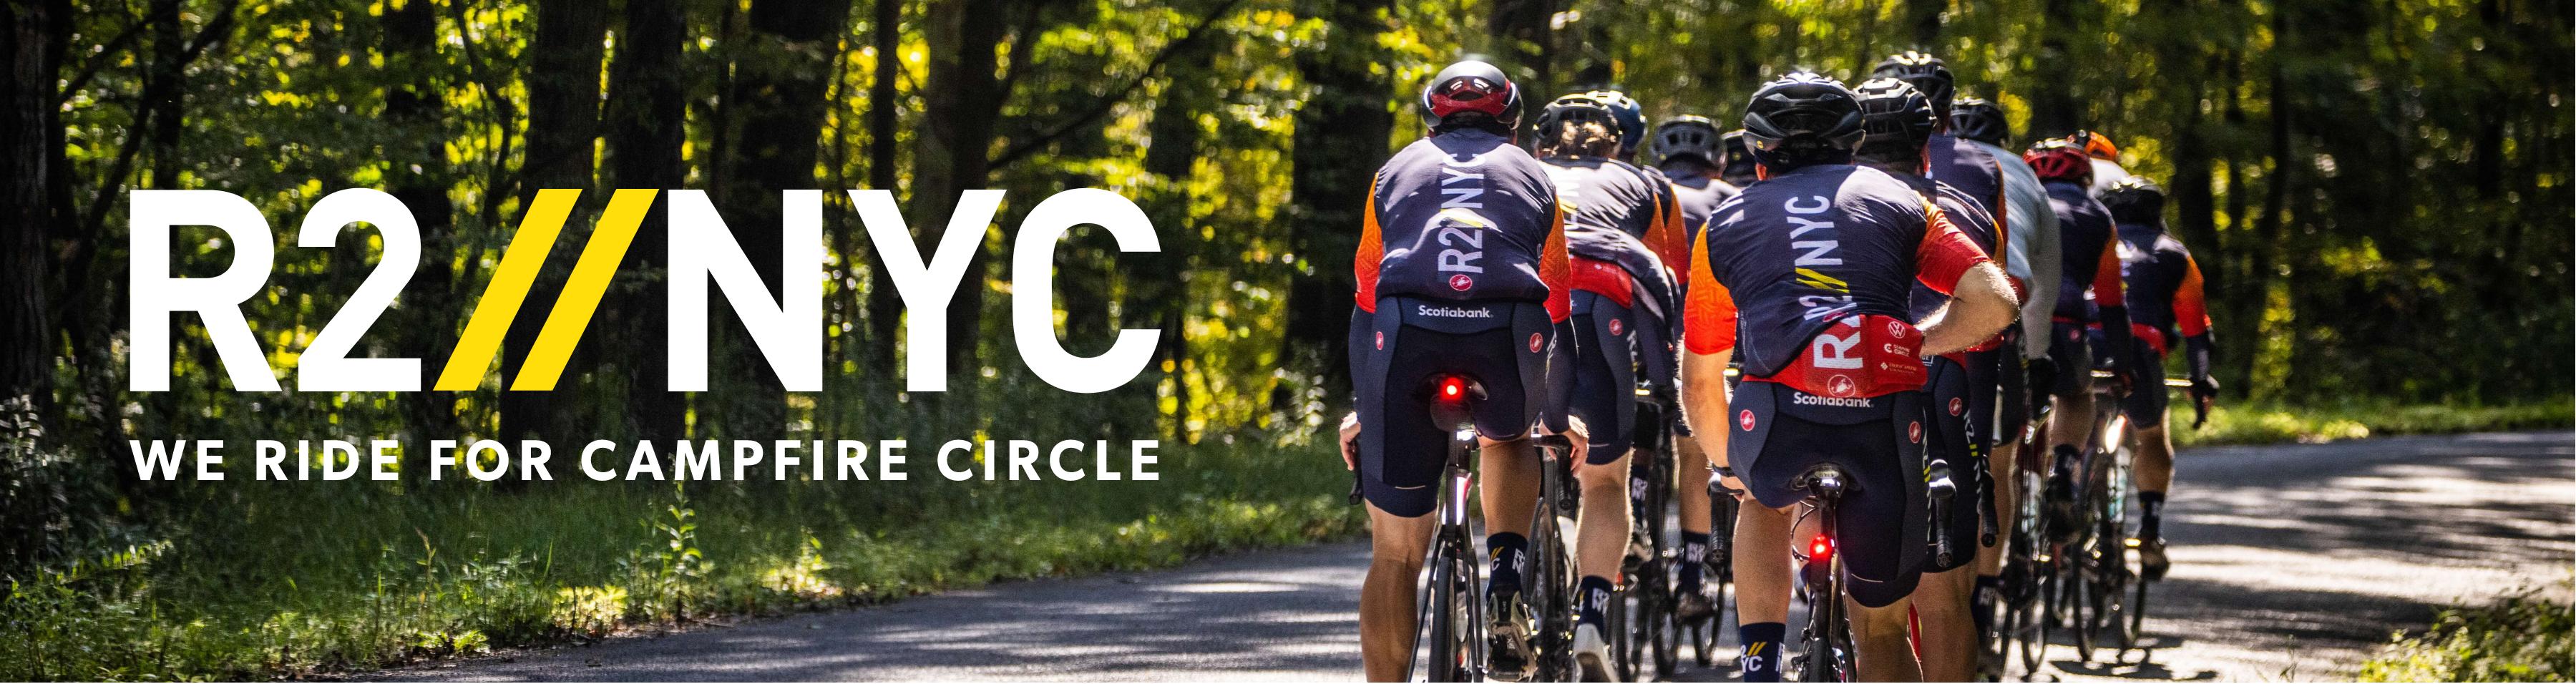 r2nyc we ride for campfire circle